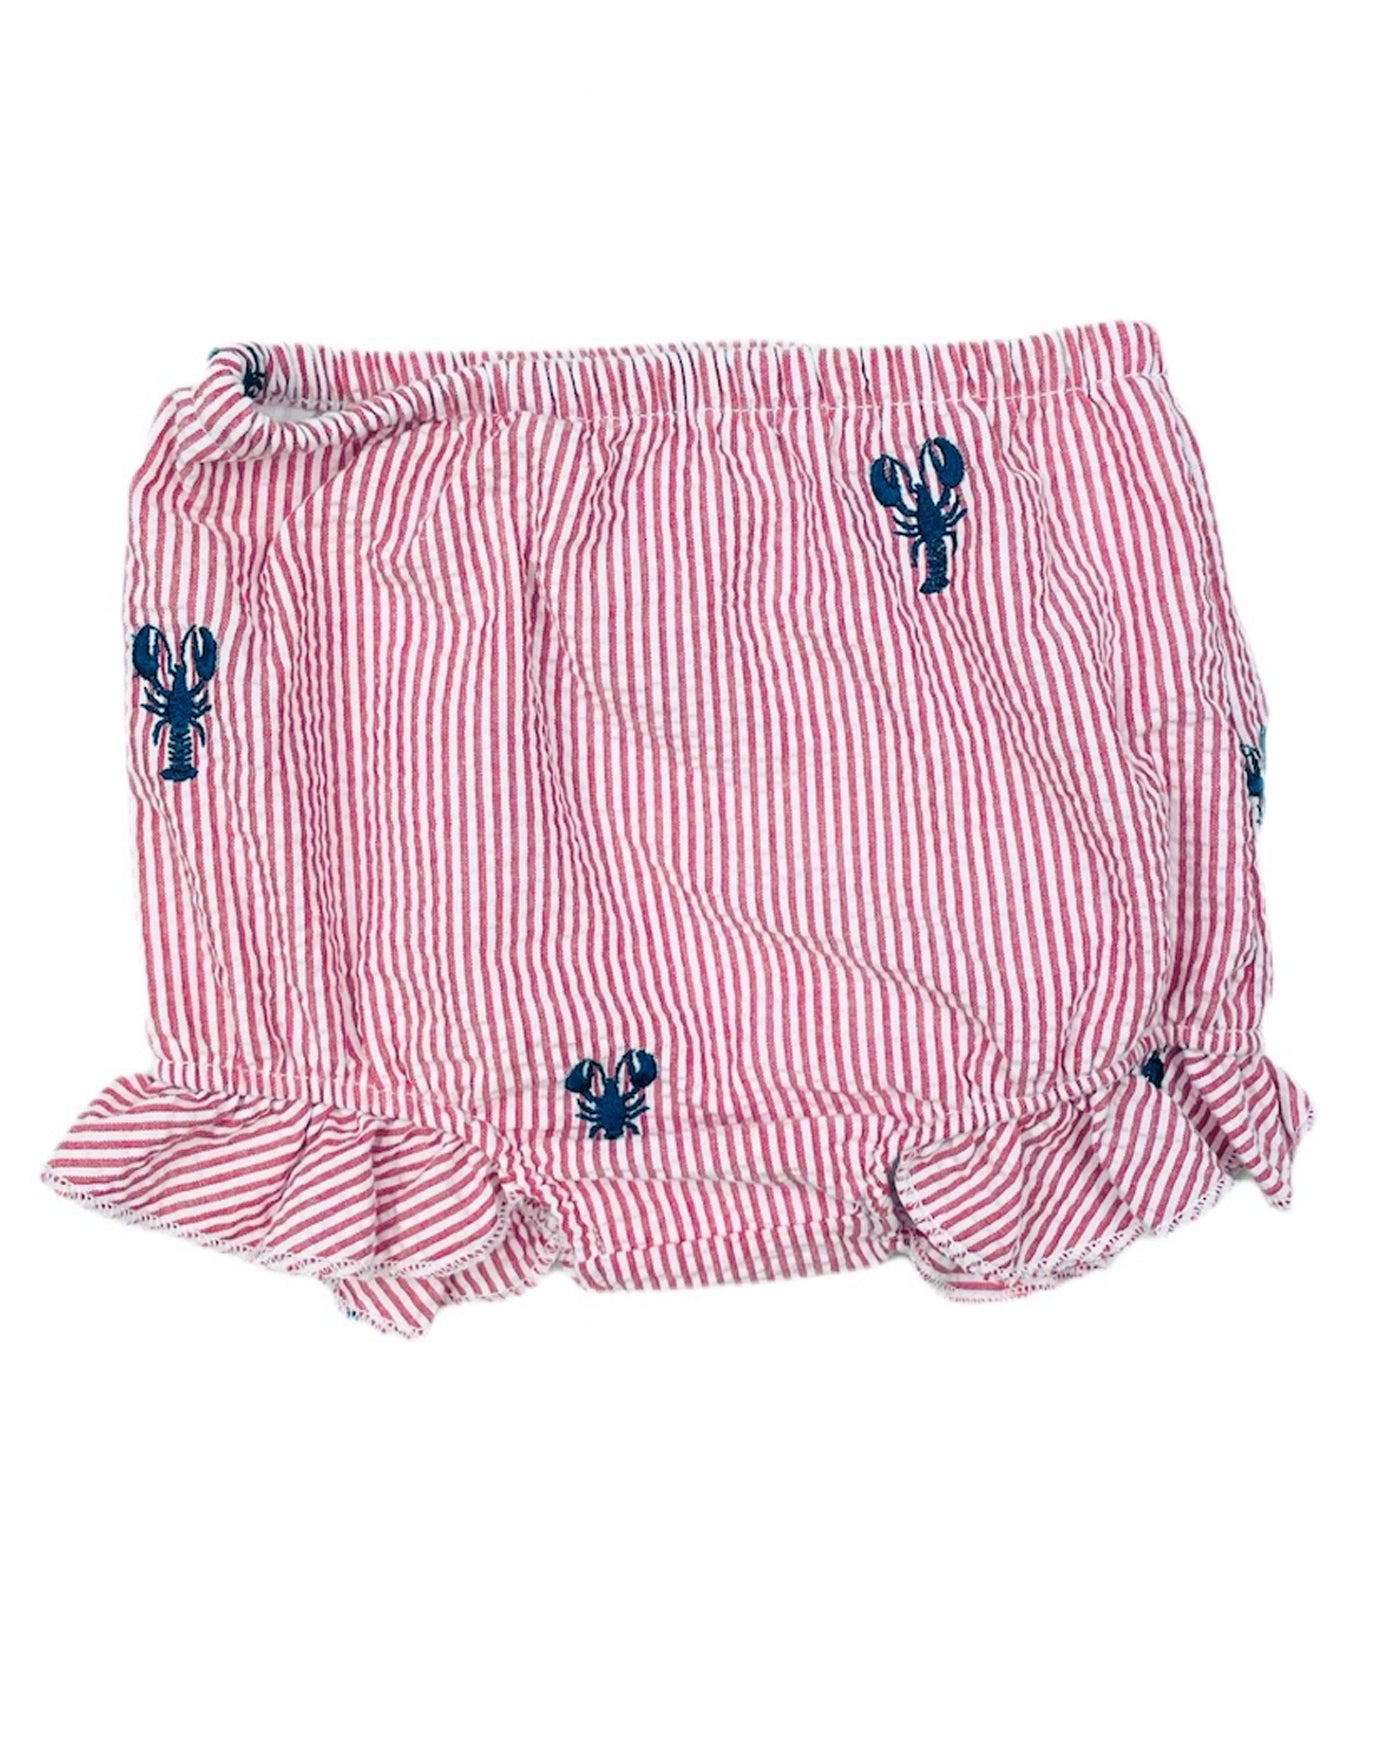 Red Seersucker Baby Bloomers with Navy Embroidered Lobsters